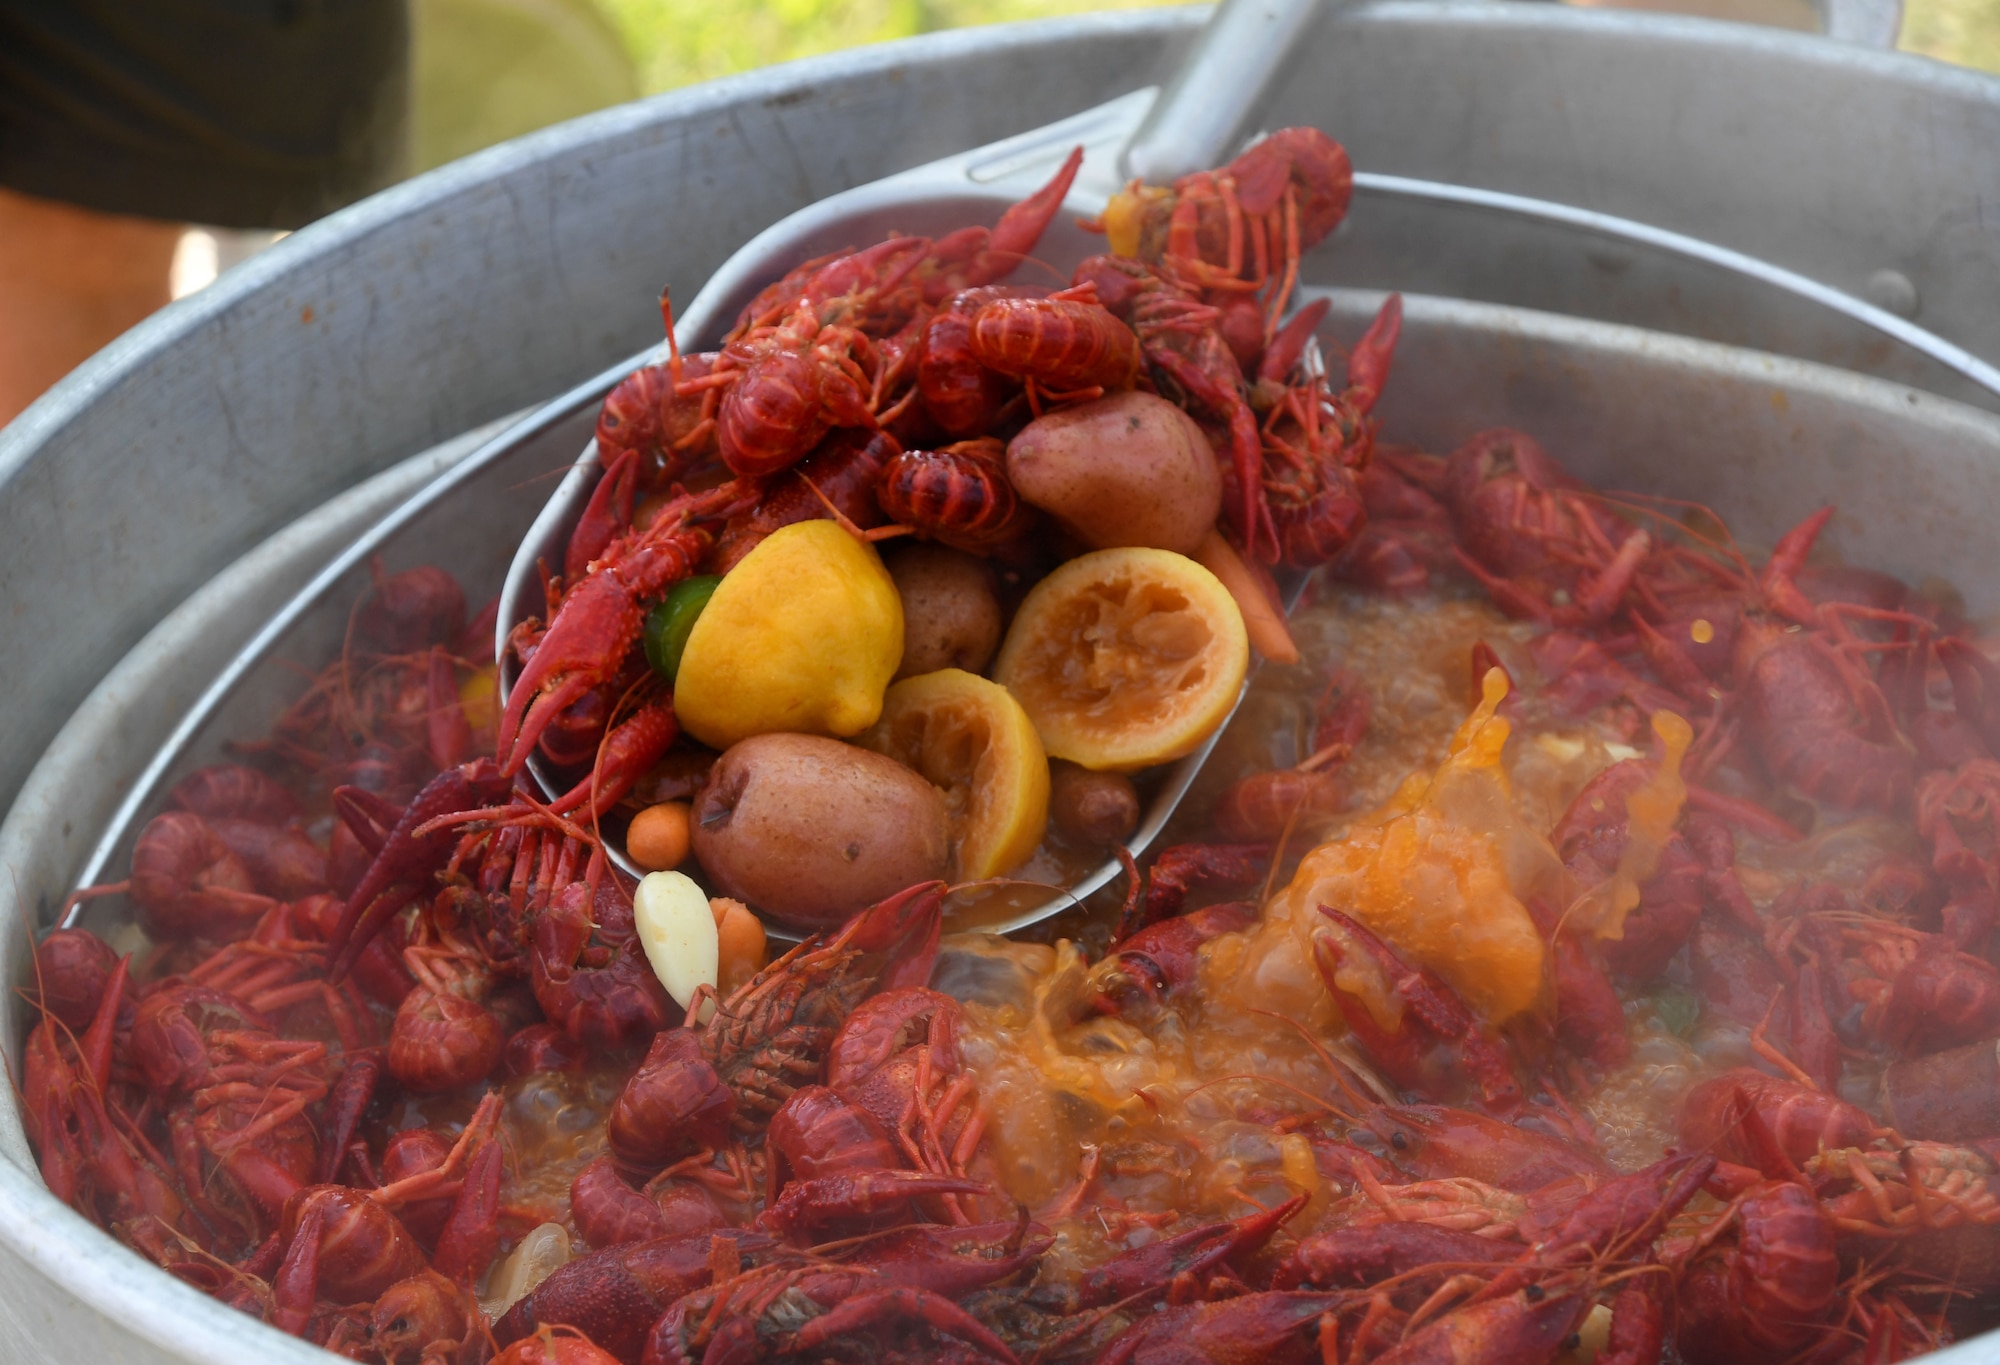 A pot of boiled crawfish and the "fixins" soak in seasonings during the 9th Annual Crawfish Cook-Off at the Bay Breeze Event Center at Keesler Air Force Base, Mississippi, June 11, 2021. Twelve teams competed in the event and more than 800 pounds of crawfish were distributed. (U.S. Air Force photo by Kemberly Groue)